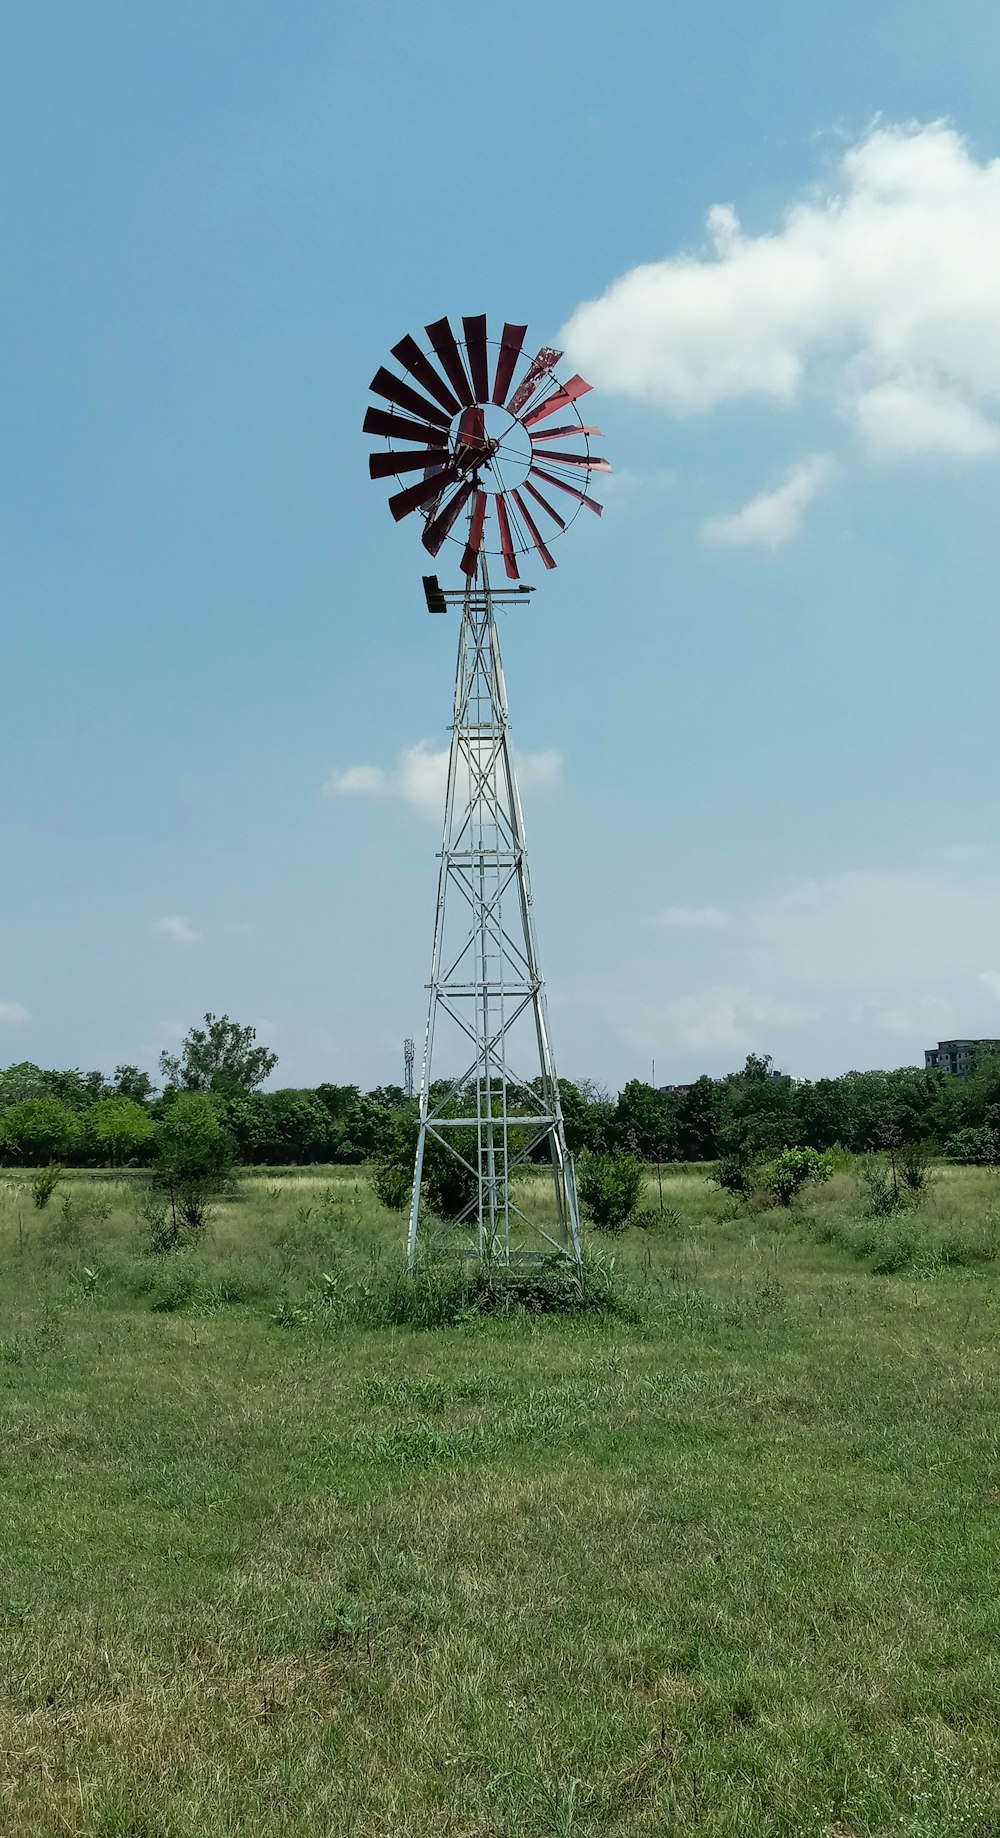 red and white windmill on green grass field under blue sky during daytime